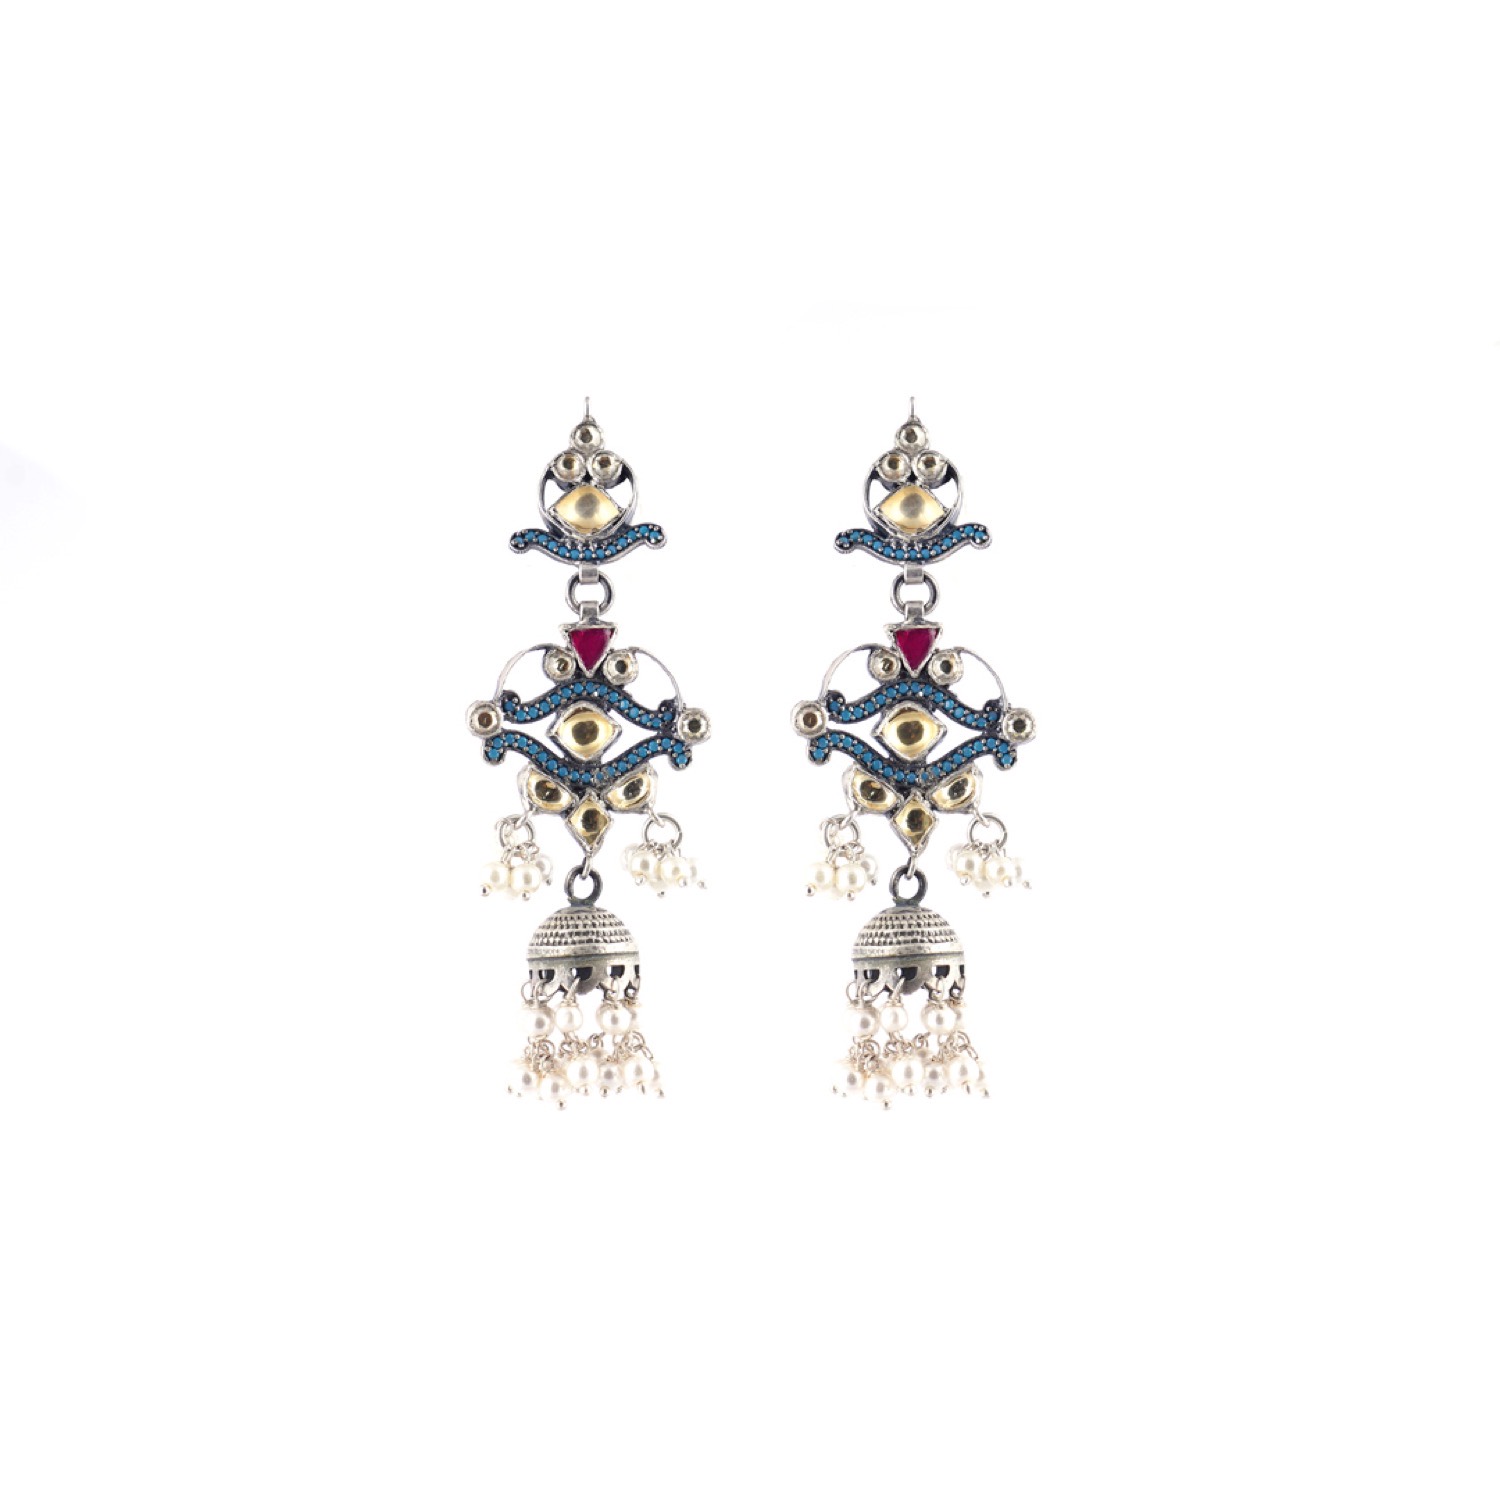 varam_earrings_102022_blue_pink_and_yellow_stone_with_white_bead_dangling_silver_earrings-1